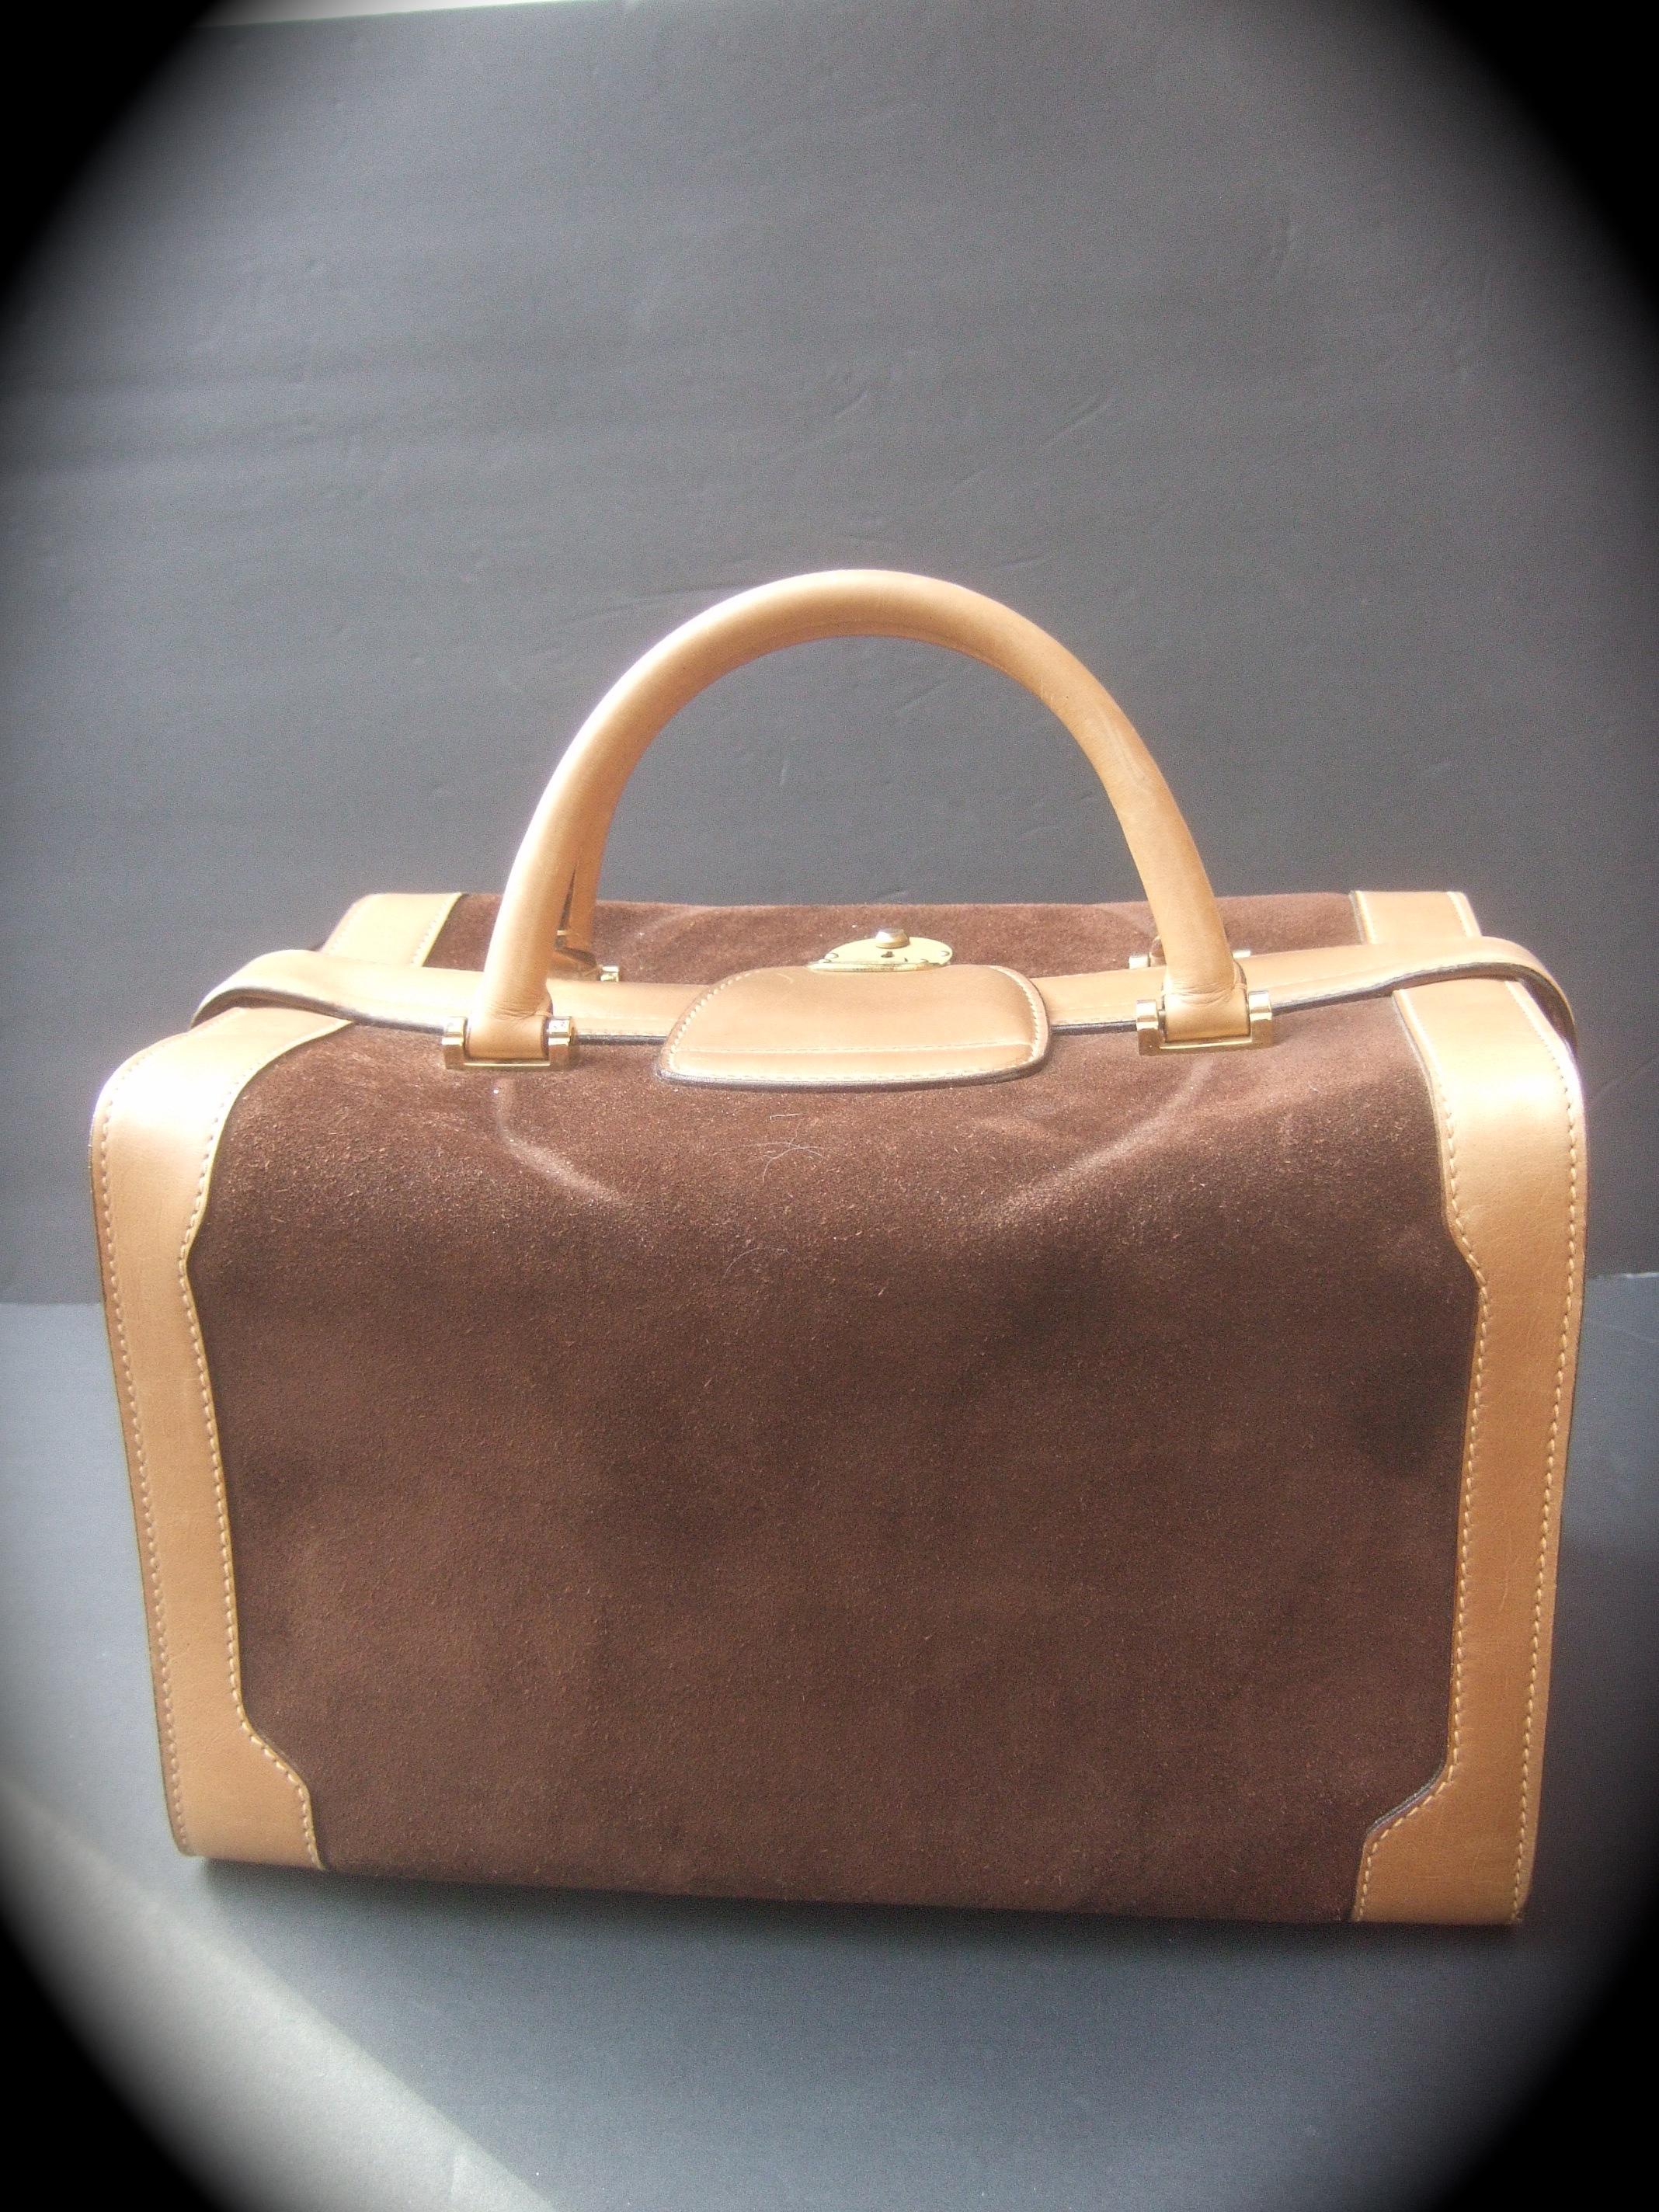 Gucci Italy Rare Chocolate Brown Suede Leather Trim Train Case c 1970s 7